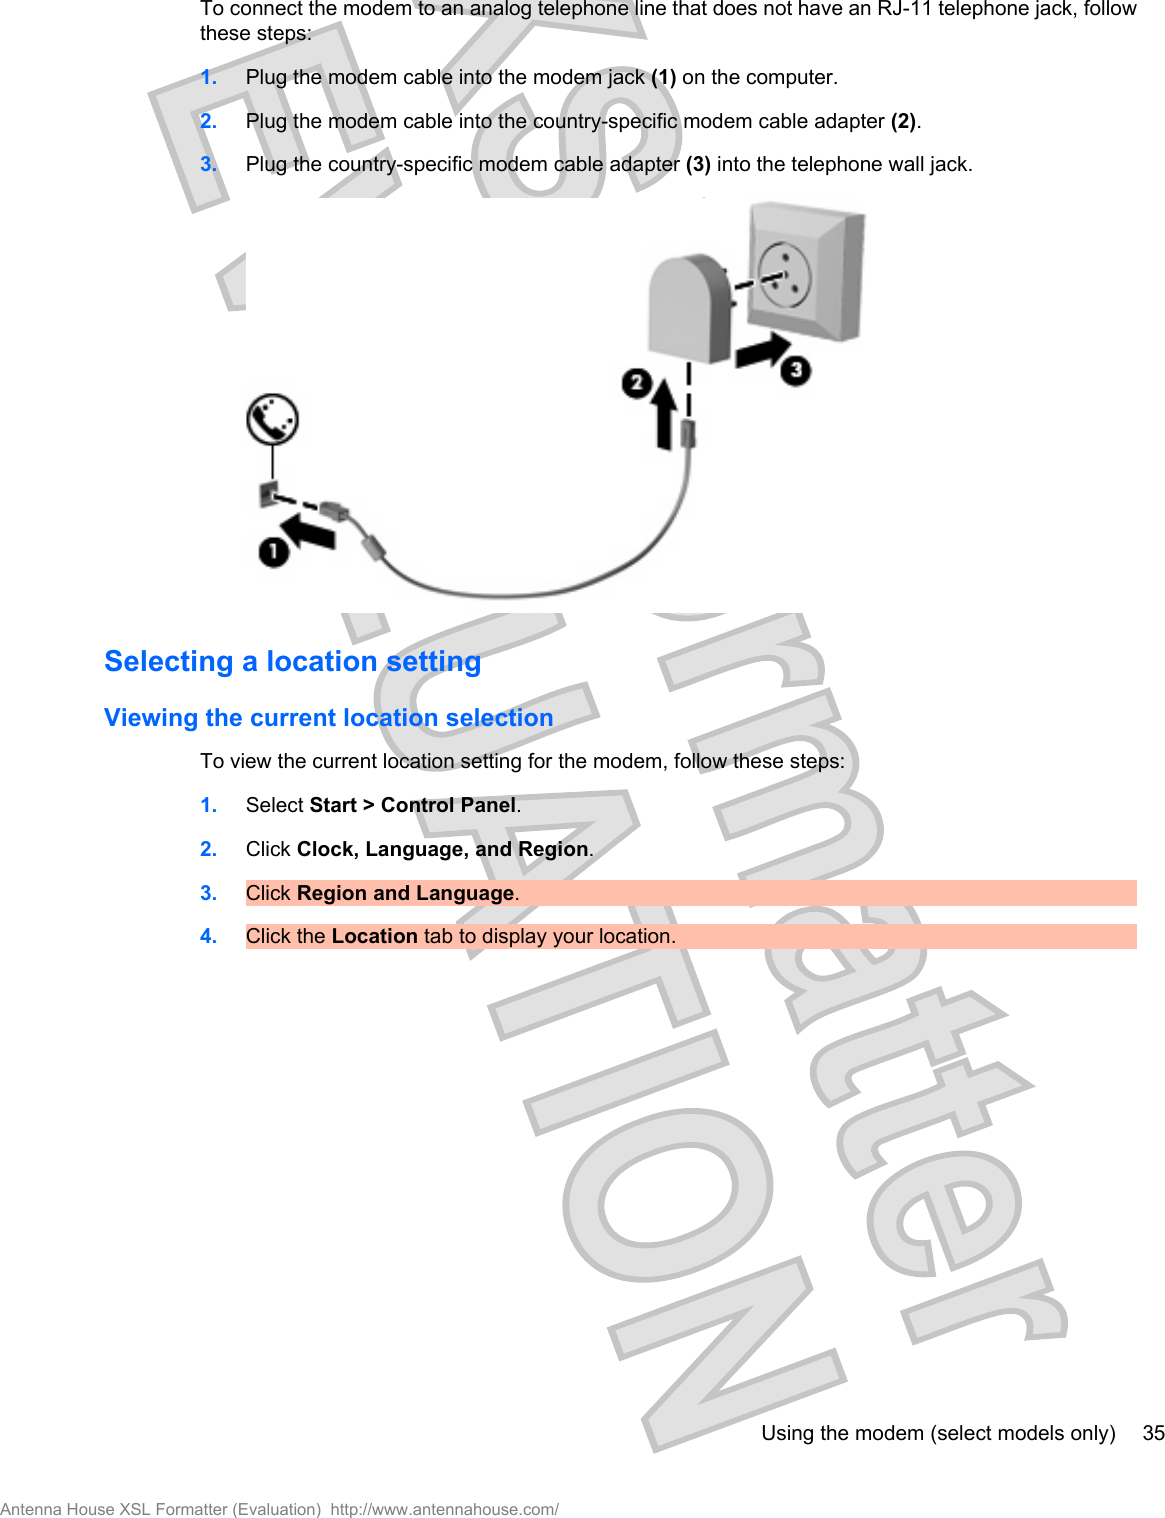 To connect the modem to an analog telephone line that does not have an RJ-11 telephone jack, followthese steps:1. Plug the modem cable into the modem jack (1) on the computer.2. Plug the modem cable into the country-specific modem cable adapter (2).3. Plug the country-specific modem cable adapter (3) into the telephone wall jack.Selecting a location settingViewing the current location selectionTo view the current location setting for the modem, follow these steps:1. Select Start &gt; Control Panel.2. Click Clock, Language, and Region.3. Click Region and Language.4. Click the Location tab to display your location.Using the modem (select models only) 35Antenna House XSL Formatter (Evaluation)  http://www.antennahouse.com/